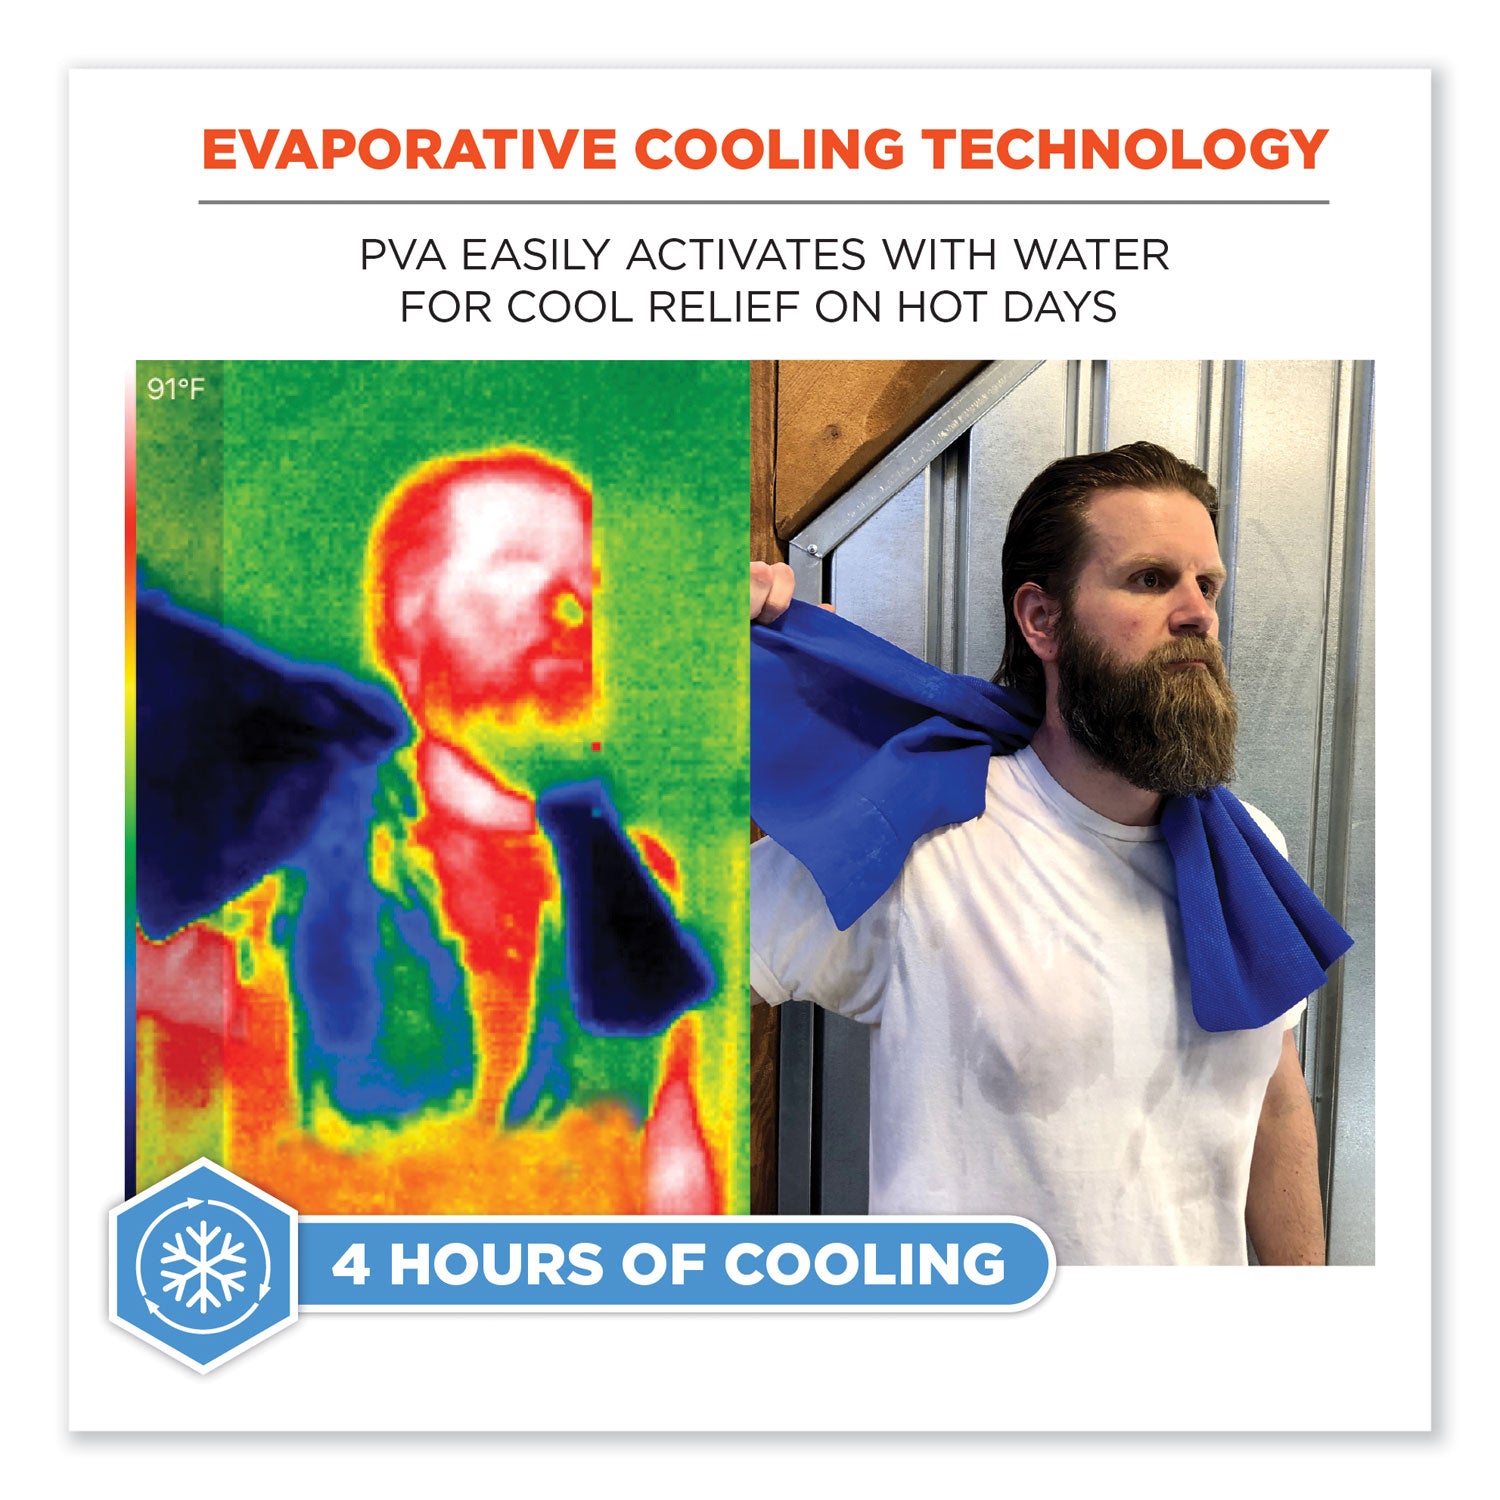 chill-its-6602-evaporative-pva-cooling-towel-295-x-13-one-size-fits-most-pva-pink-ships-in-1-3-business-days_ego12442 - 2